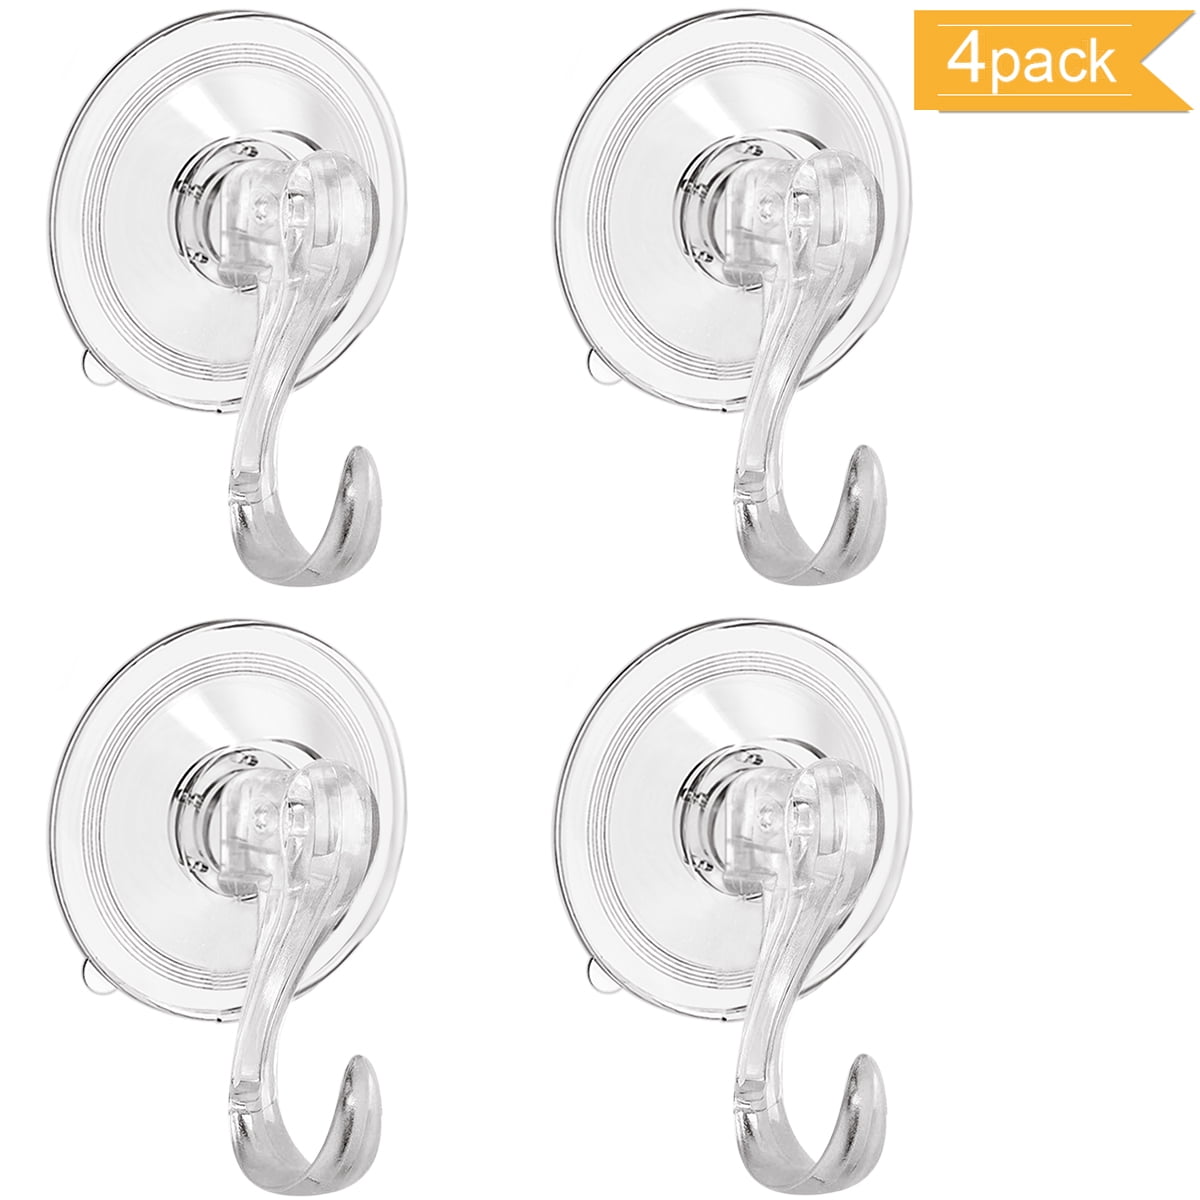 Suction Cup Hooks for Shower 2PCS Heavy Duty Strong Suction Cups with Hooks Large Clear Reusable Vacuum Suction Cup Hook for Bathroom Window Glass Kitchen and Christmas Wreath Hanger 